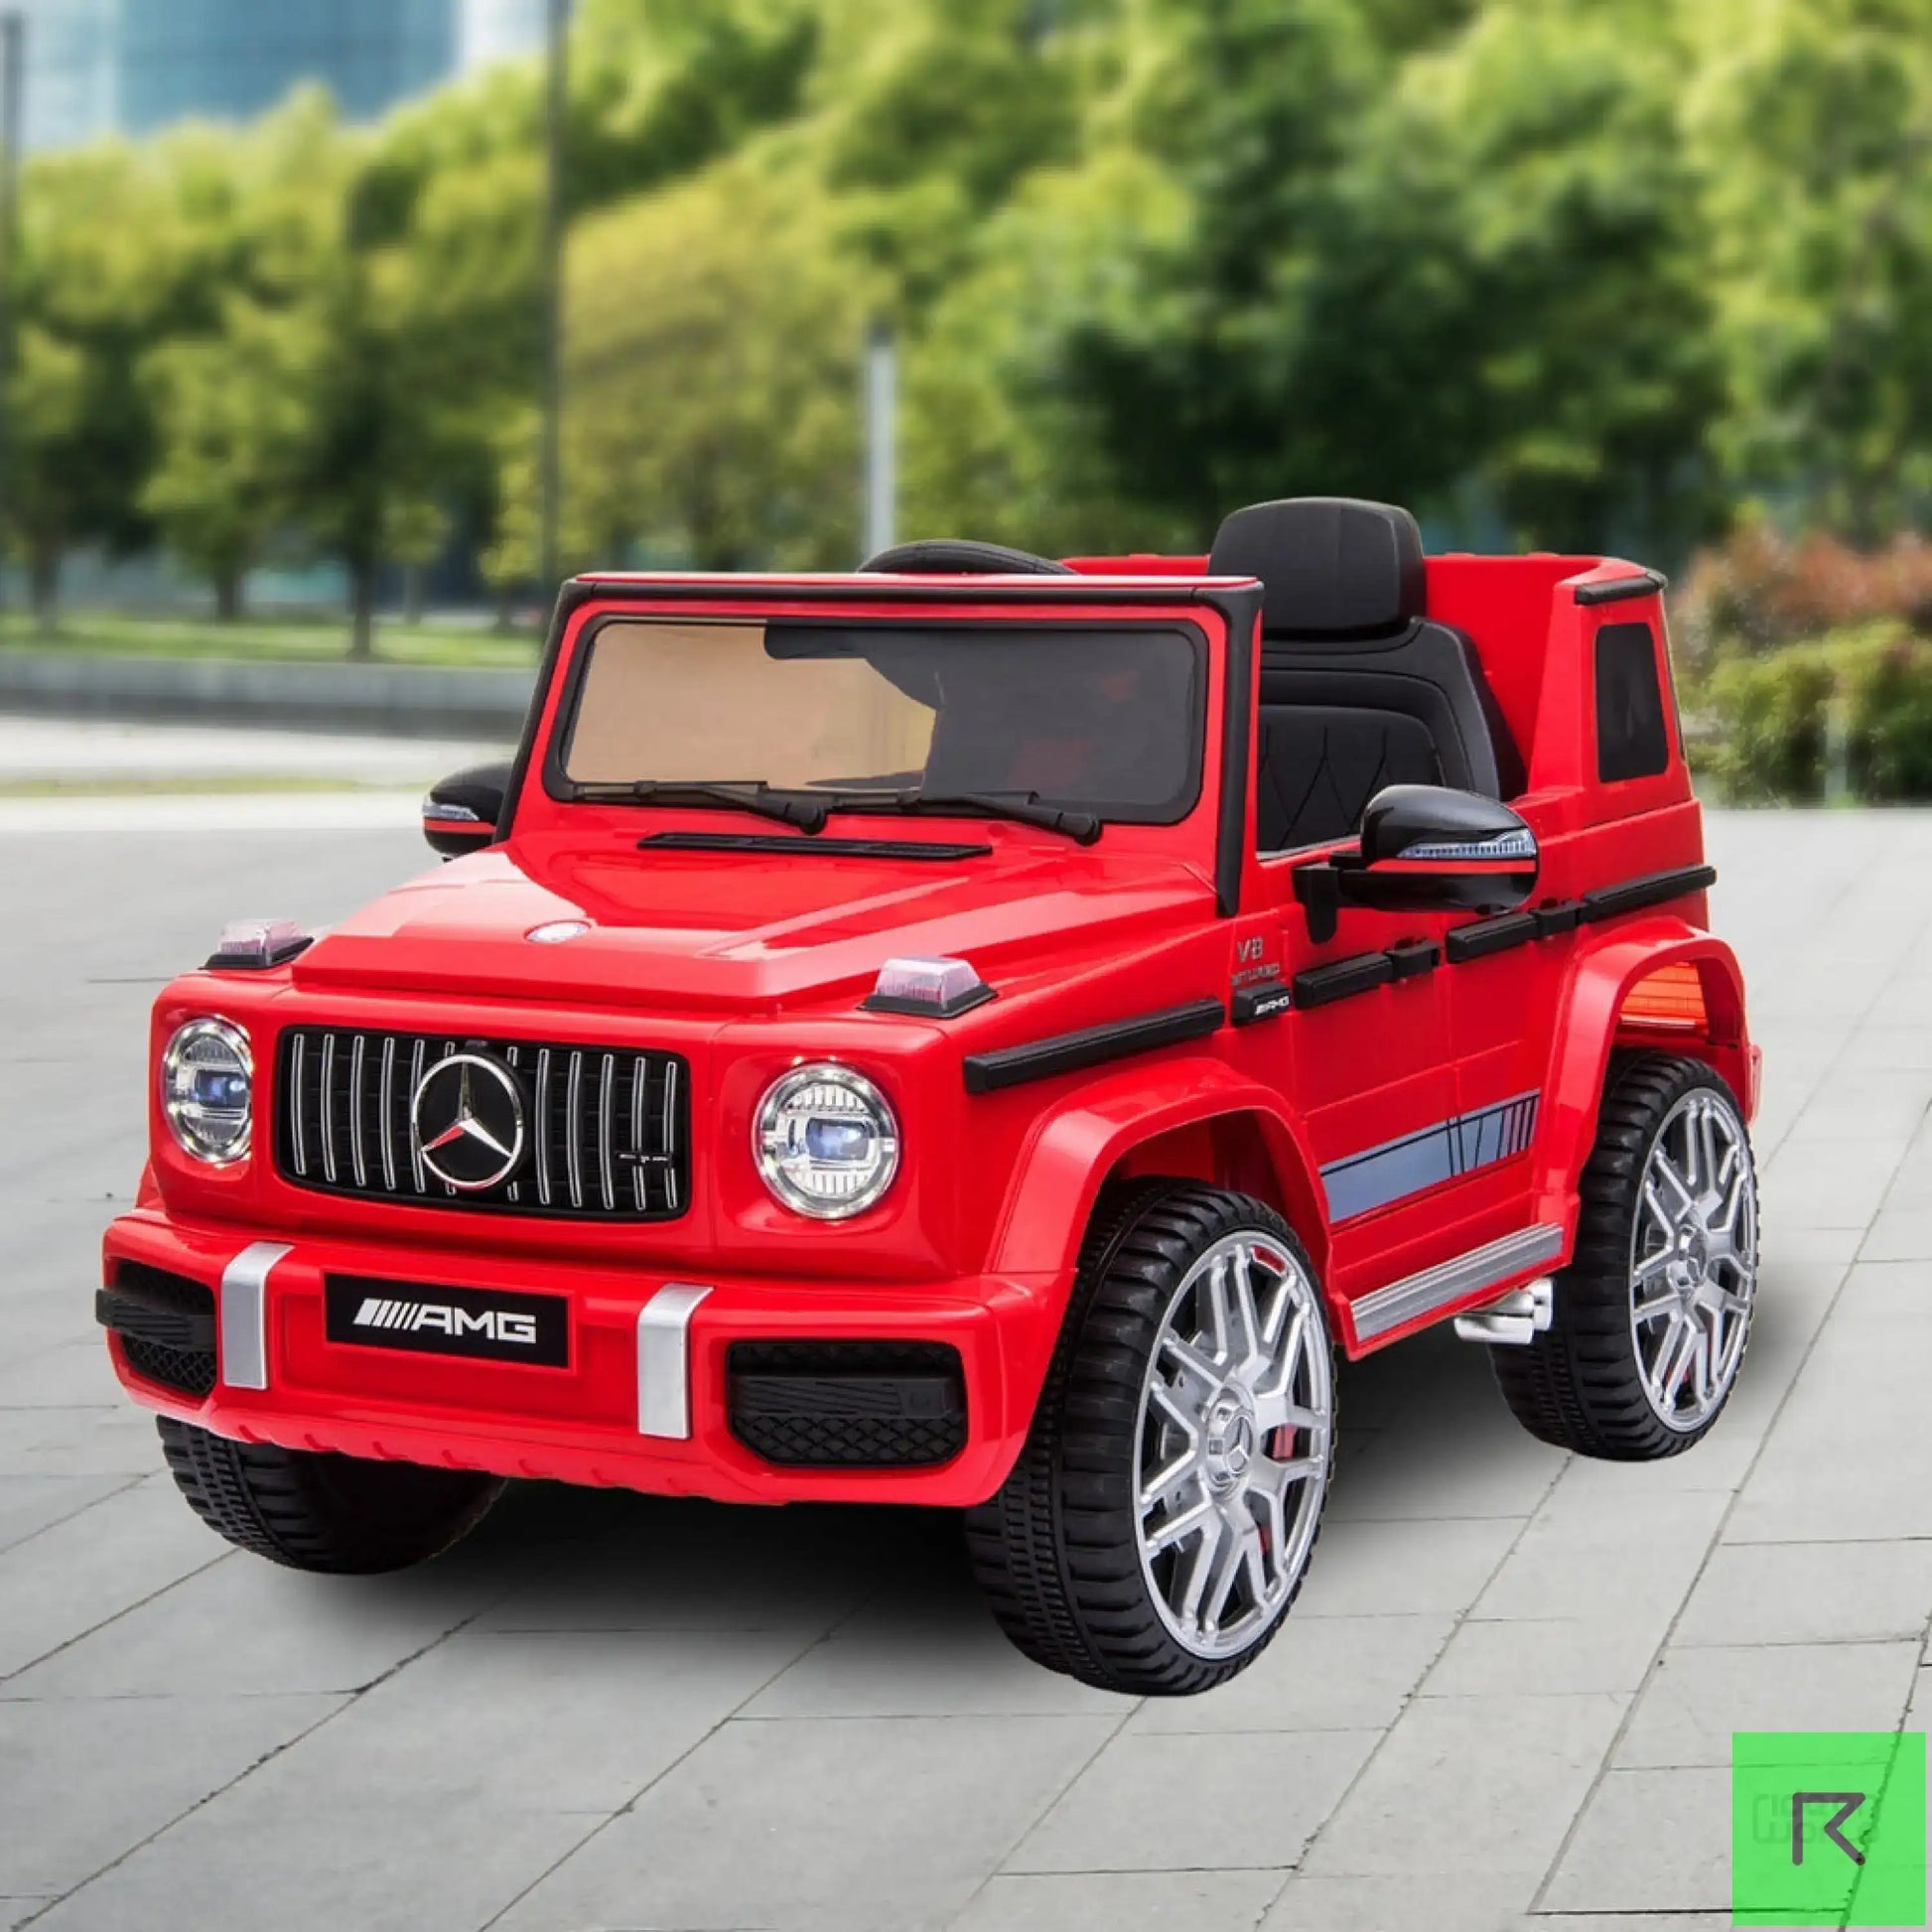 MERCEDES BENZ RED AMG G63 Licensed Kids Ride On Electric Car Remote Control - Red